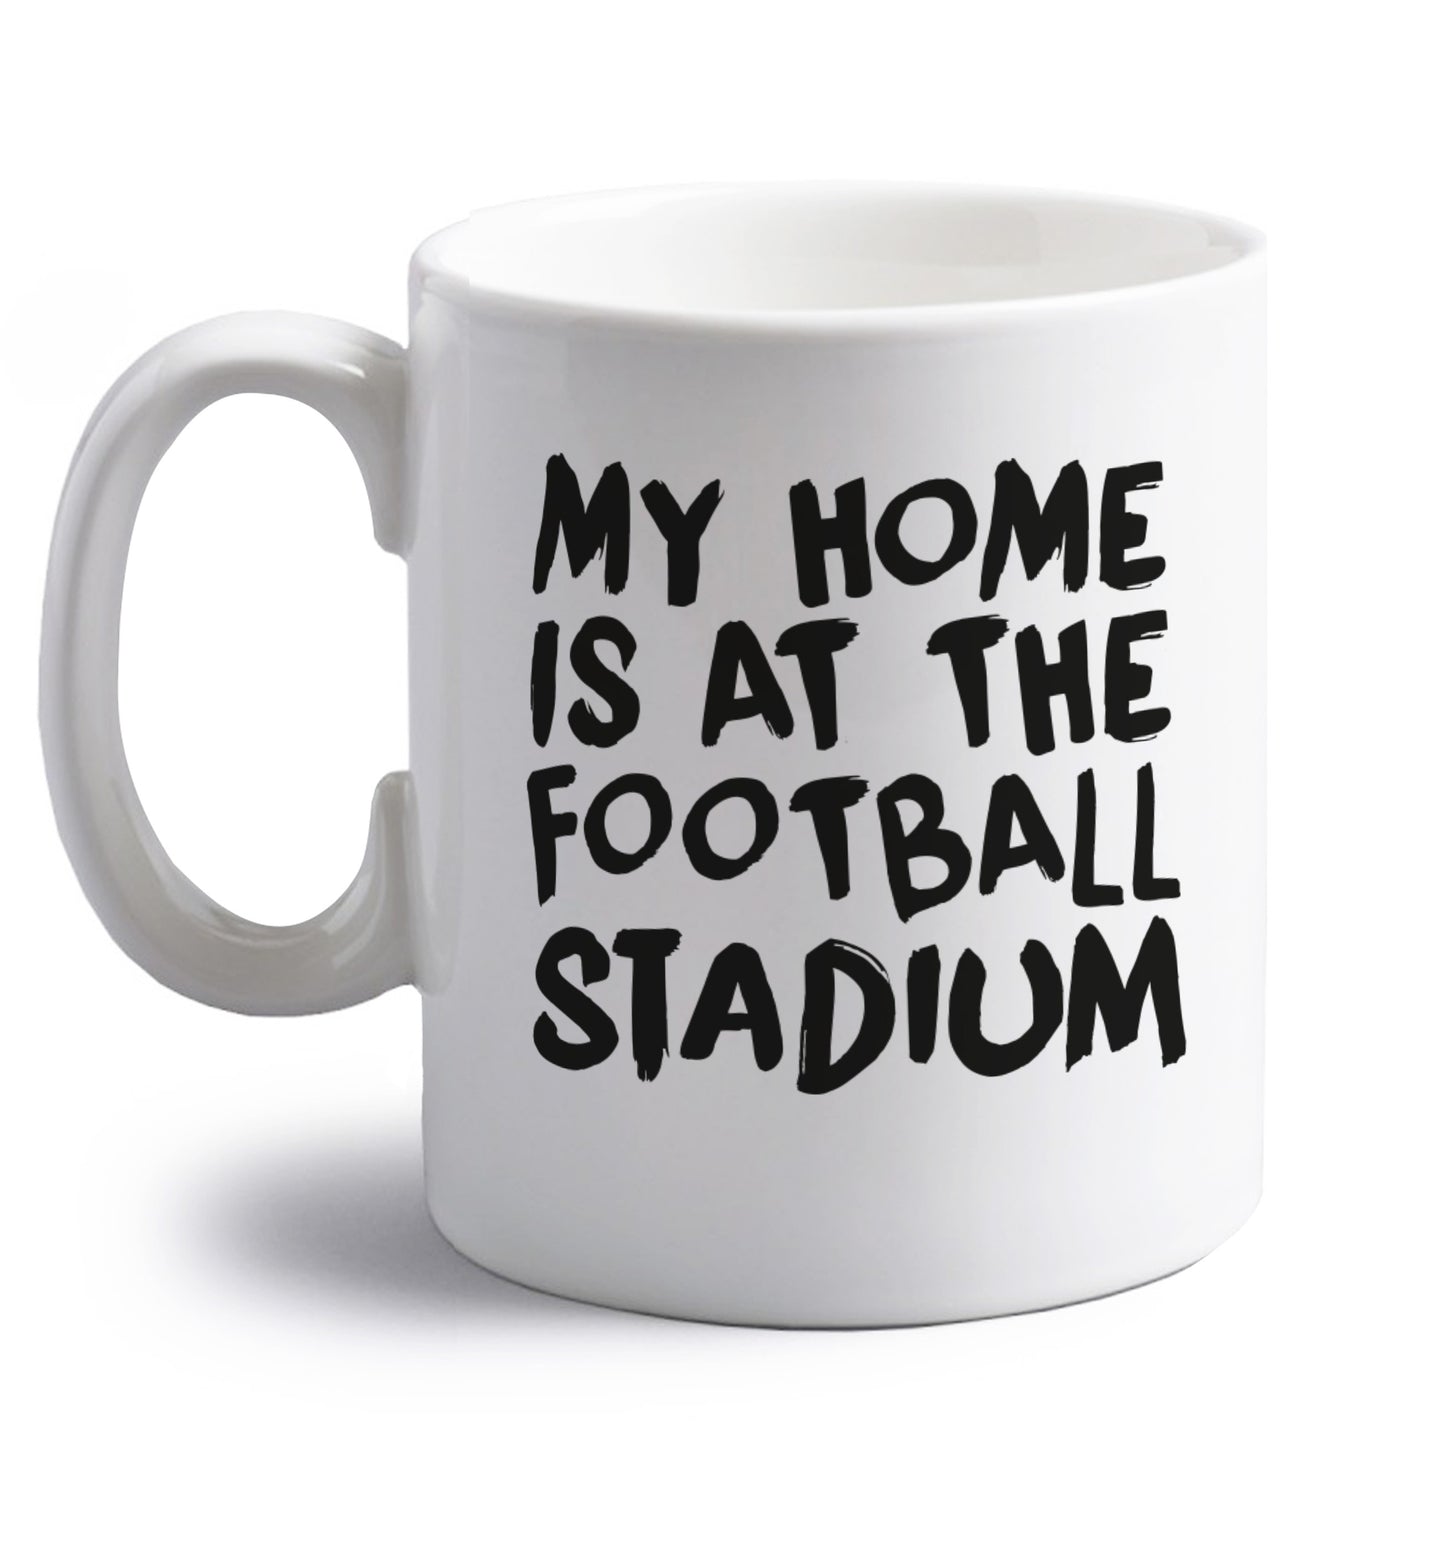 My home is at the football stadium right handed white ceramic mug 